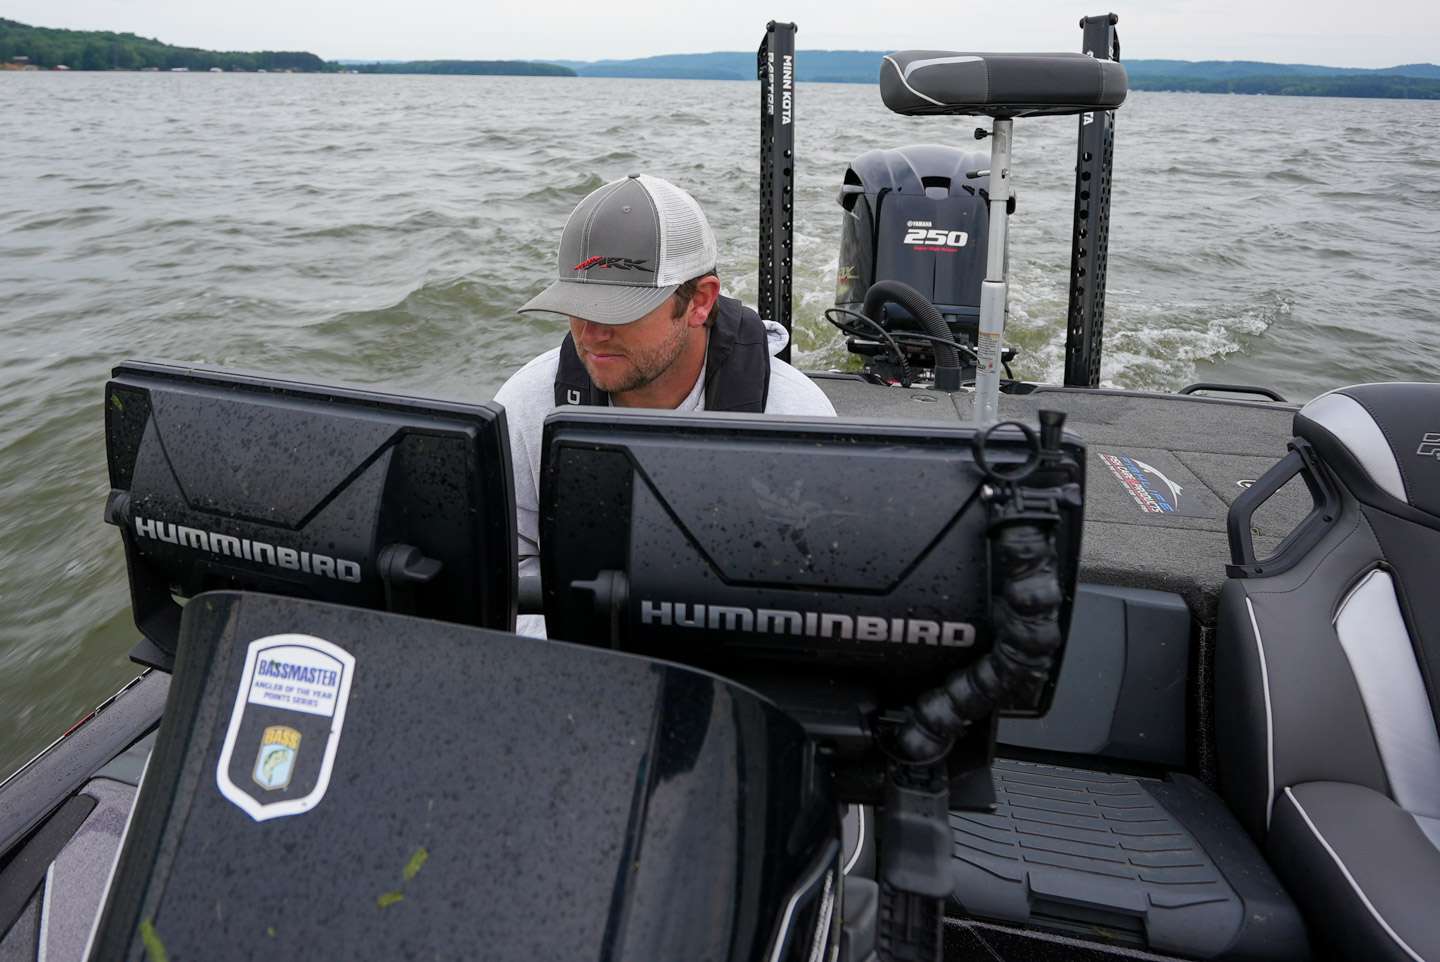 On to the next one. Logan scans his Humminbird unit to find another potential sweet spot. 